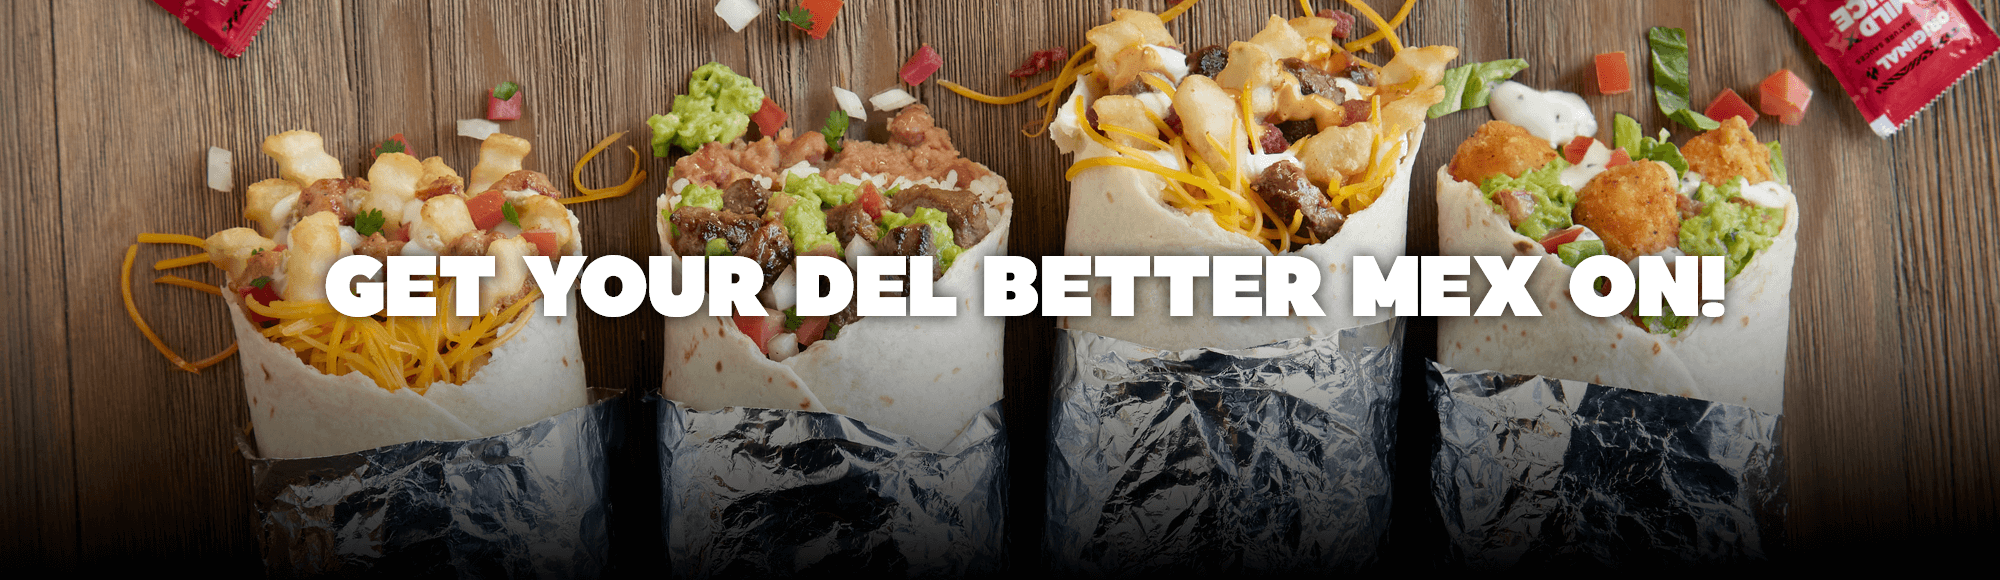 Get Your Better Mex On!